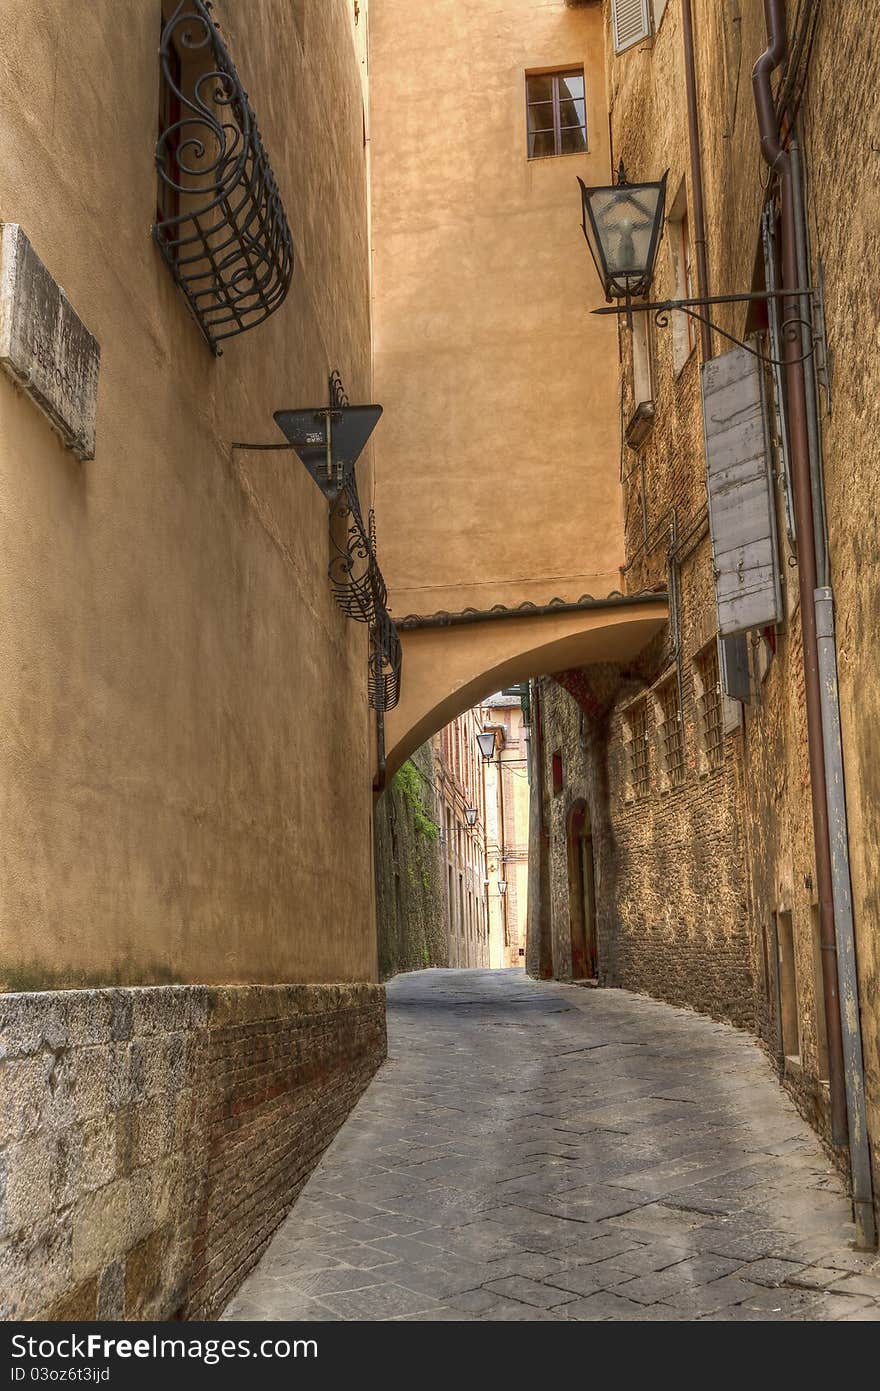 Alley in a small village in Tuscany, Italy